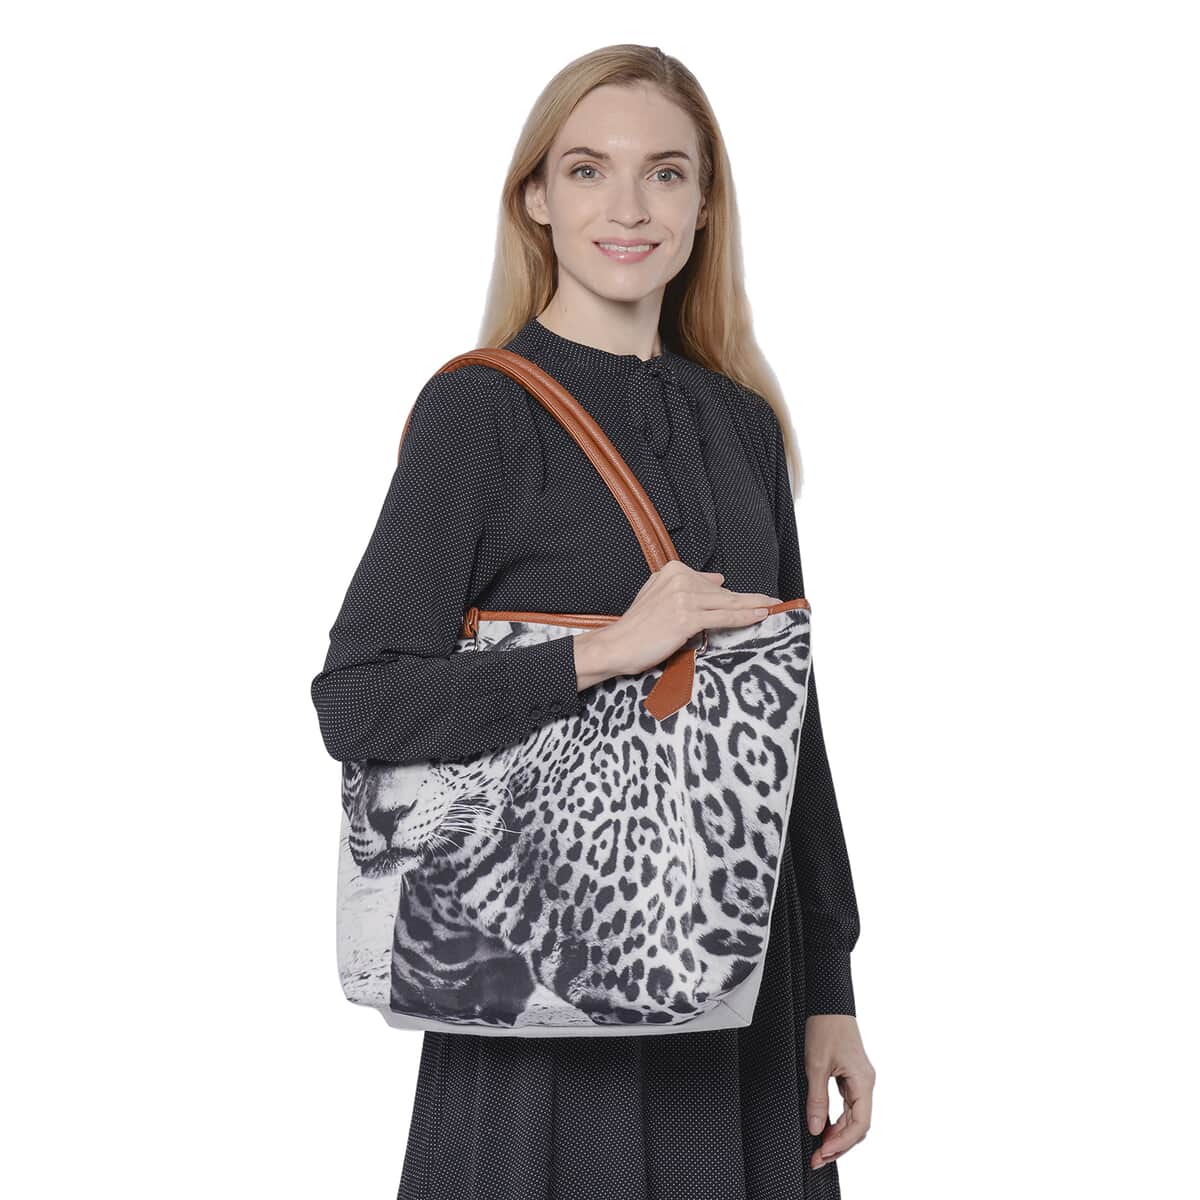 PASSAGE White and Black Realistic Leopard Pattern Polyester Tote Bag (16.54"x4.33"x14") with Handle Drop image number 1